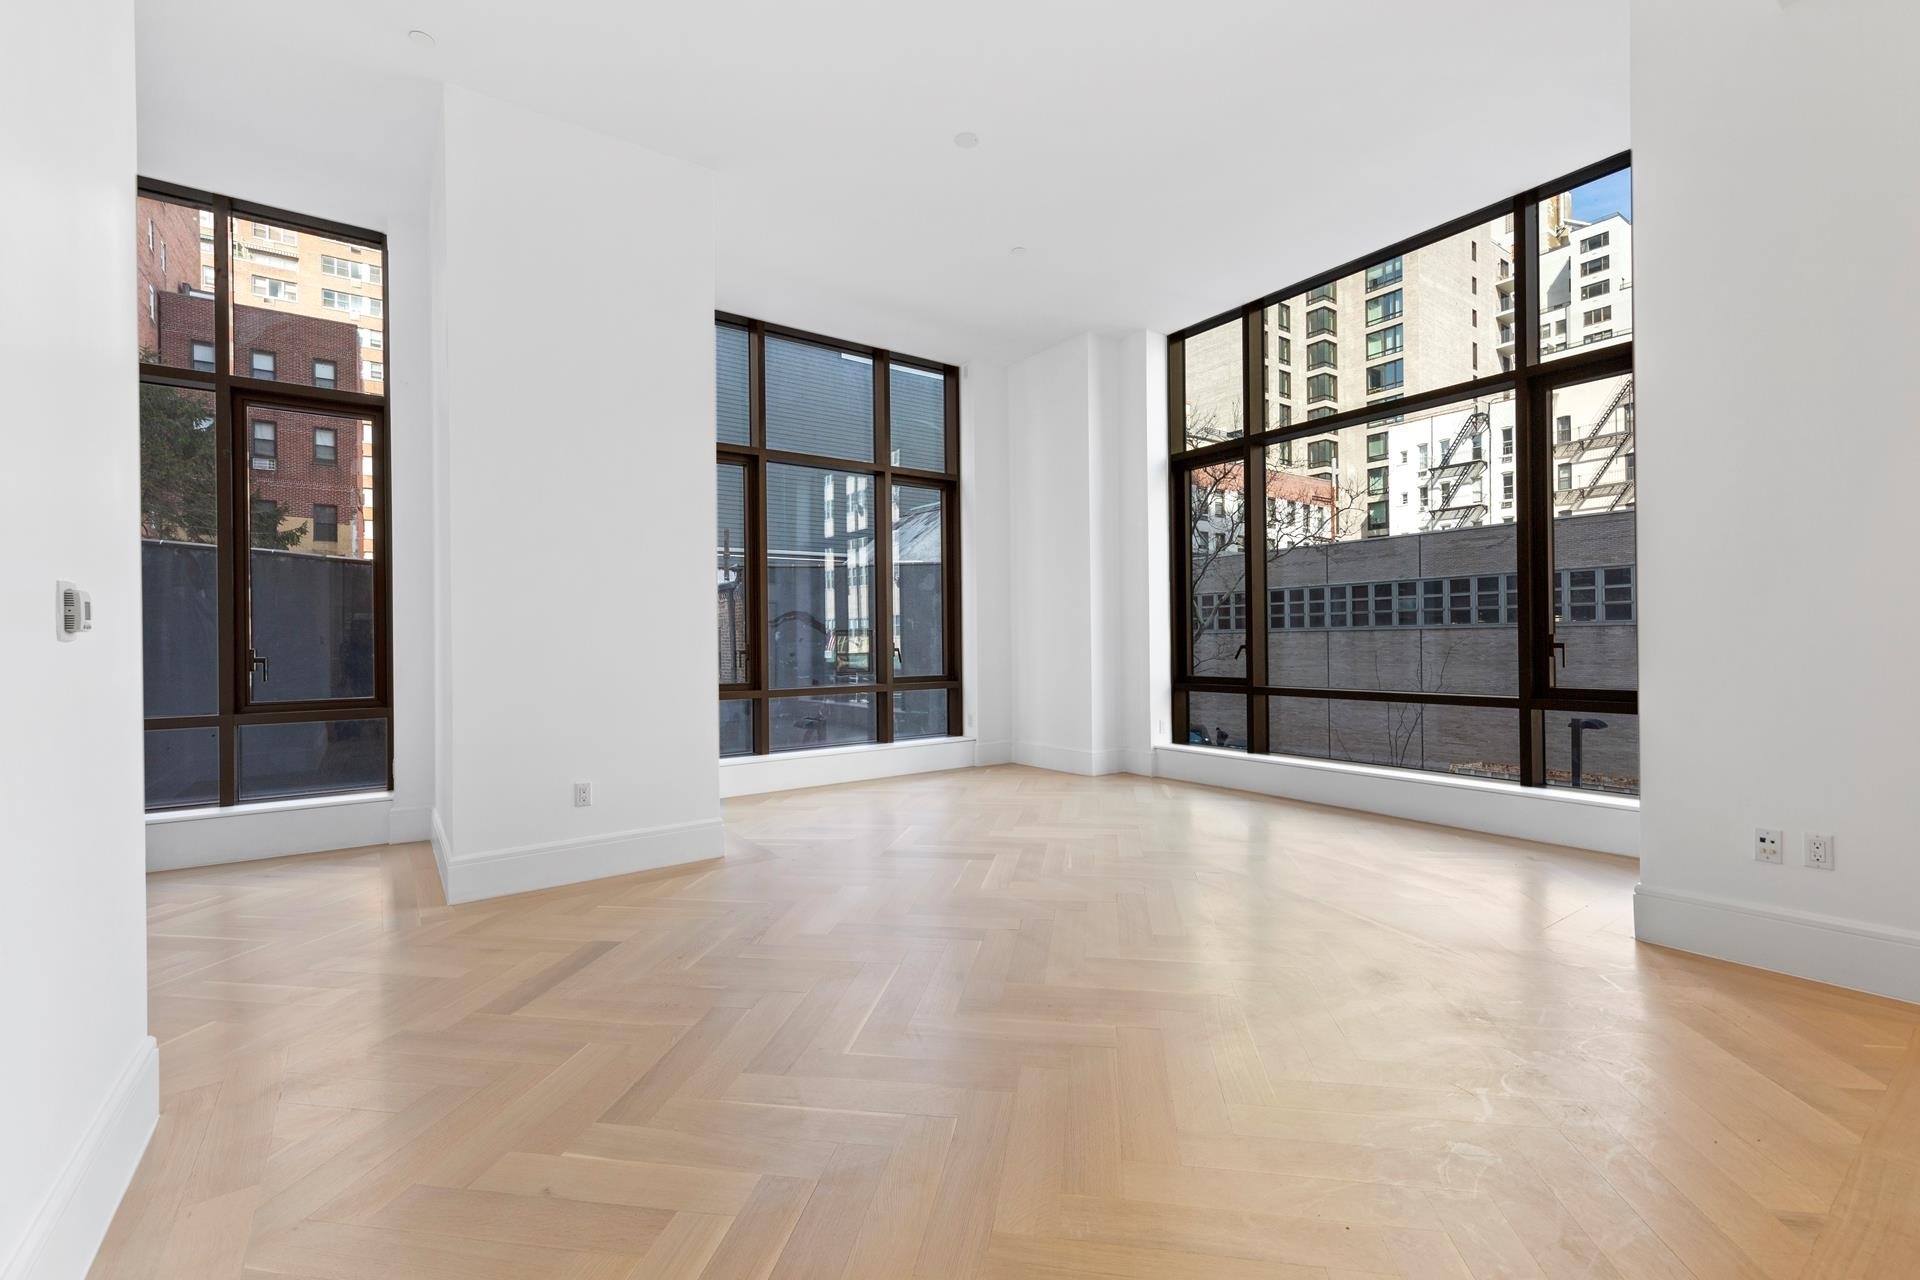 5. Condominiums for Sale at Gramercy Square, 215 E 19TH ST, 2C Gramercy Park, New York, New York 10003